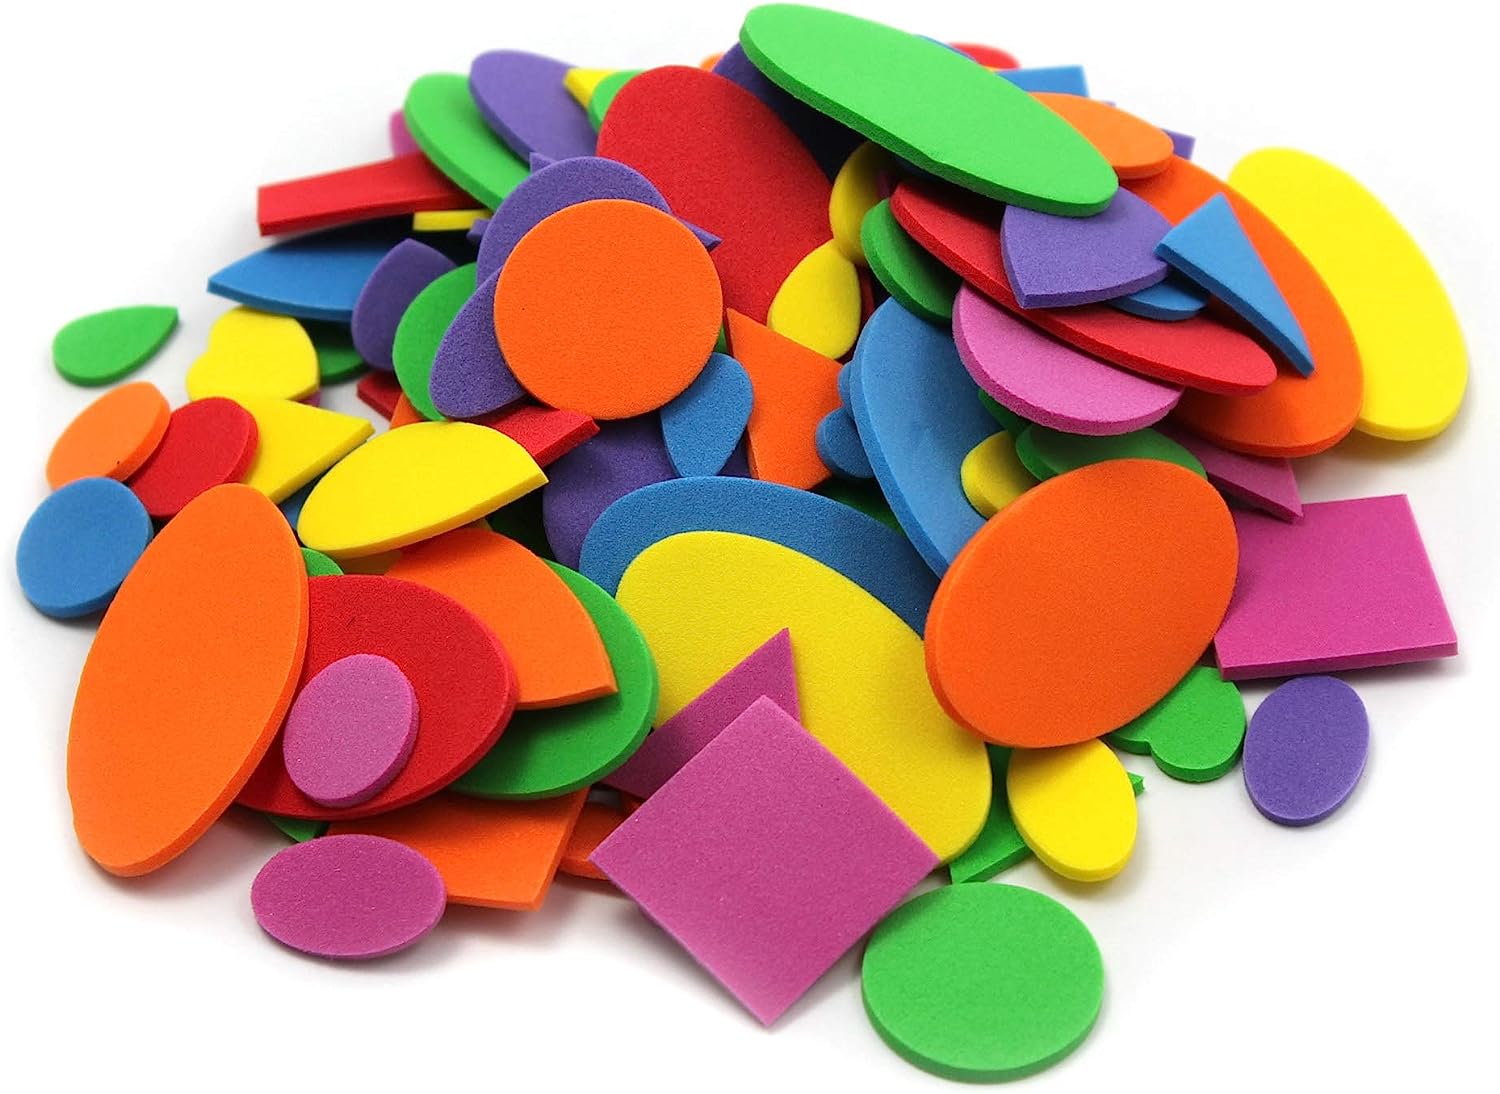 Creative Arts by Charles Leonard Foam Shapes, Assorted Colors, 264 Pieces/Bag (70526) $2.85 Amazon